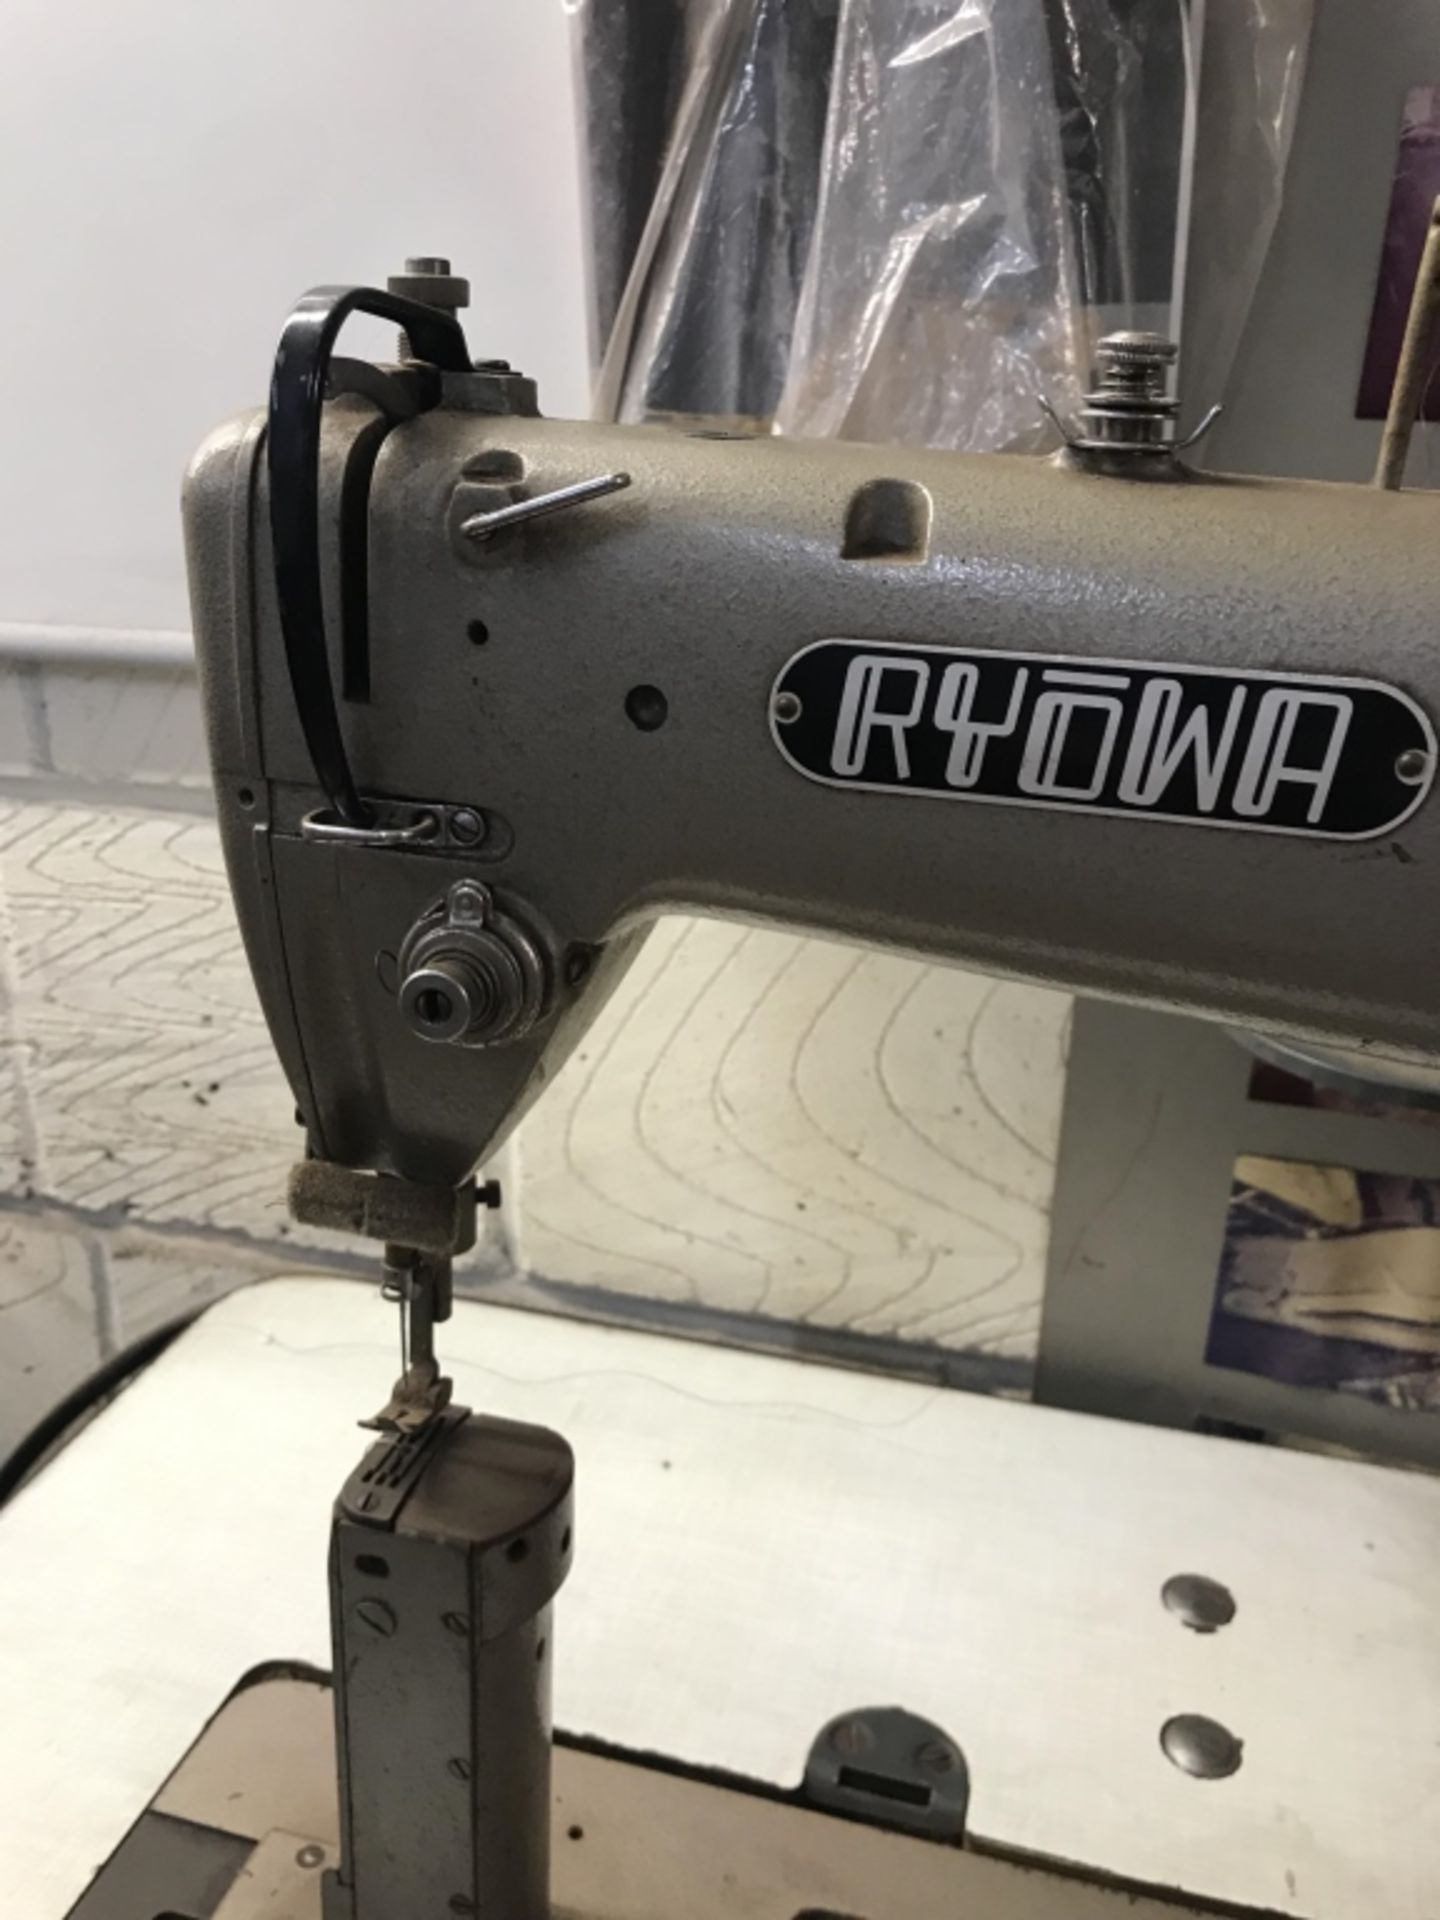 Ryowa NW-500 industrial Post Sewing Machine - Image 7 of 7